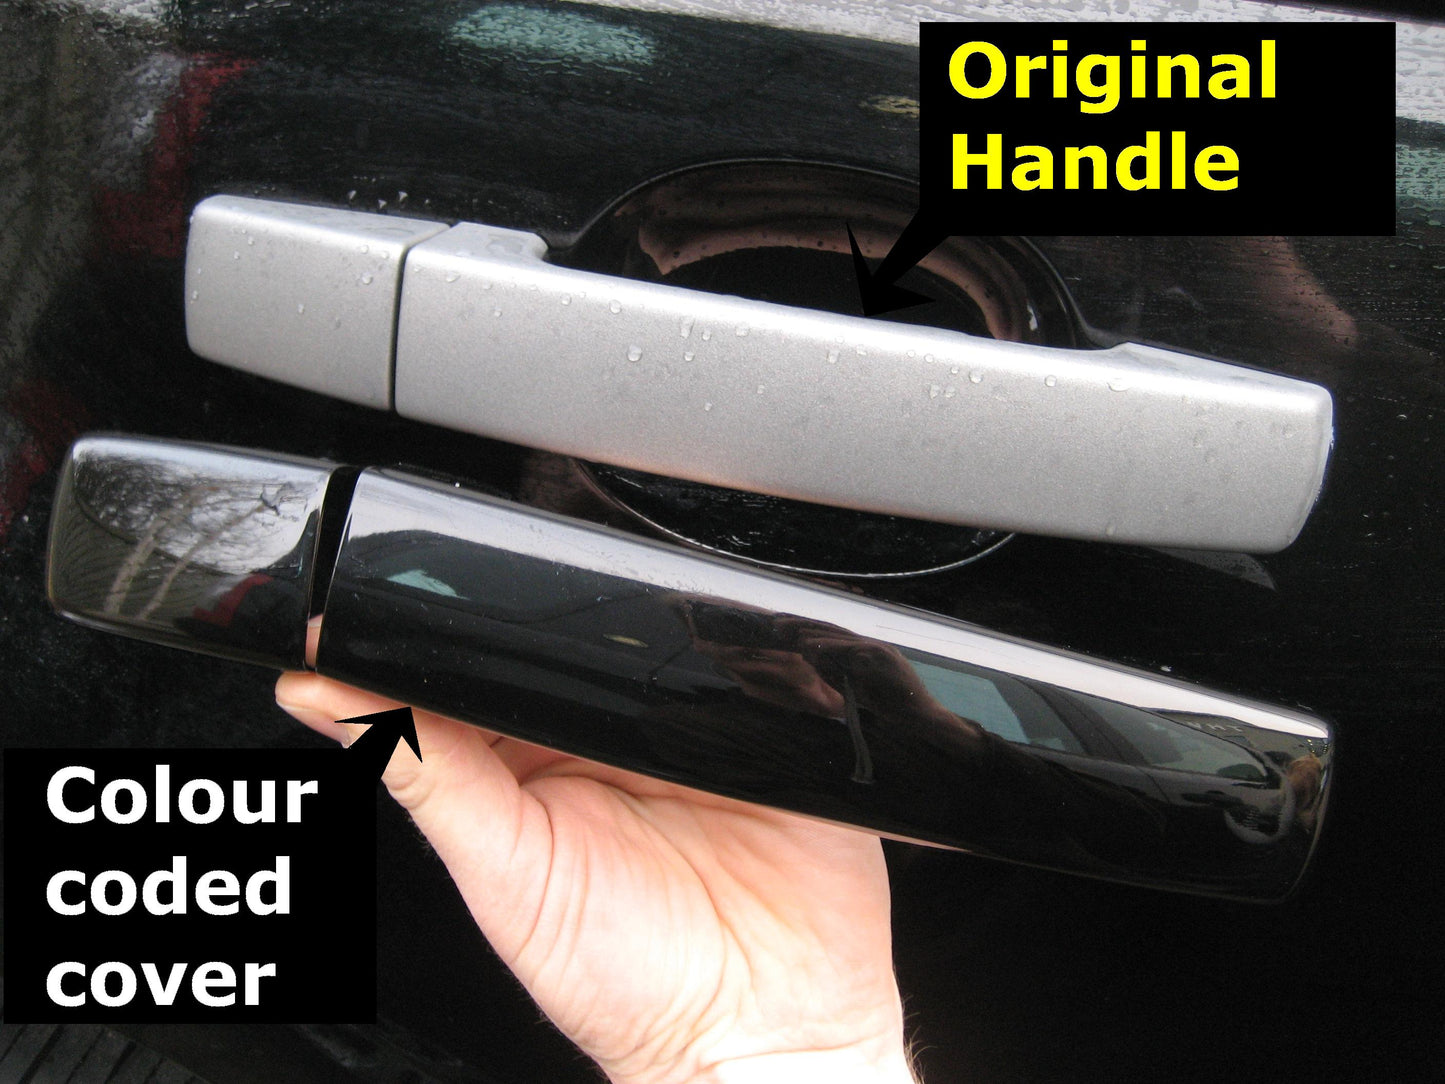 Door Handle Covers for Land Rover Discovery 3 fitted with 2 pc Handles  - Java Black